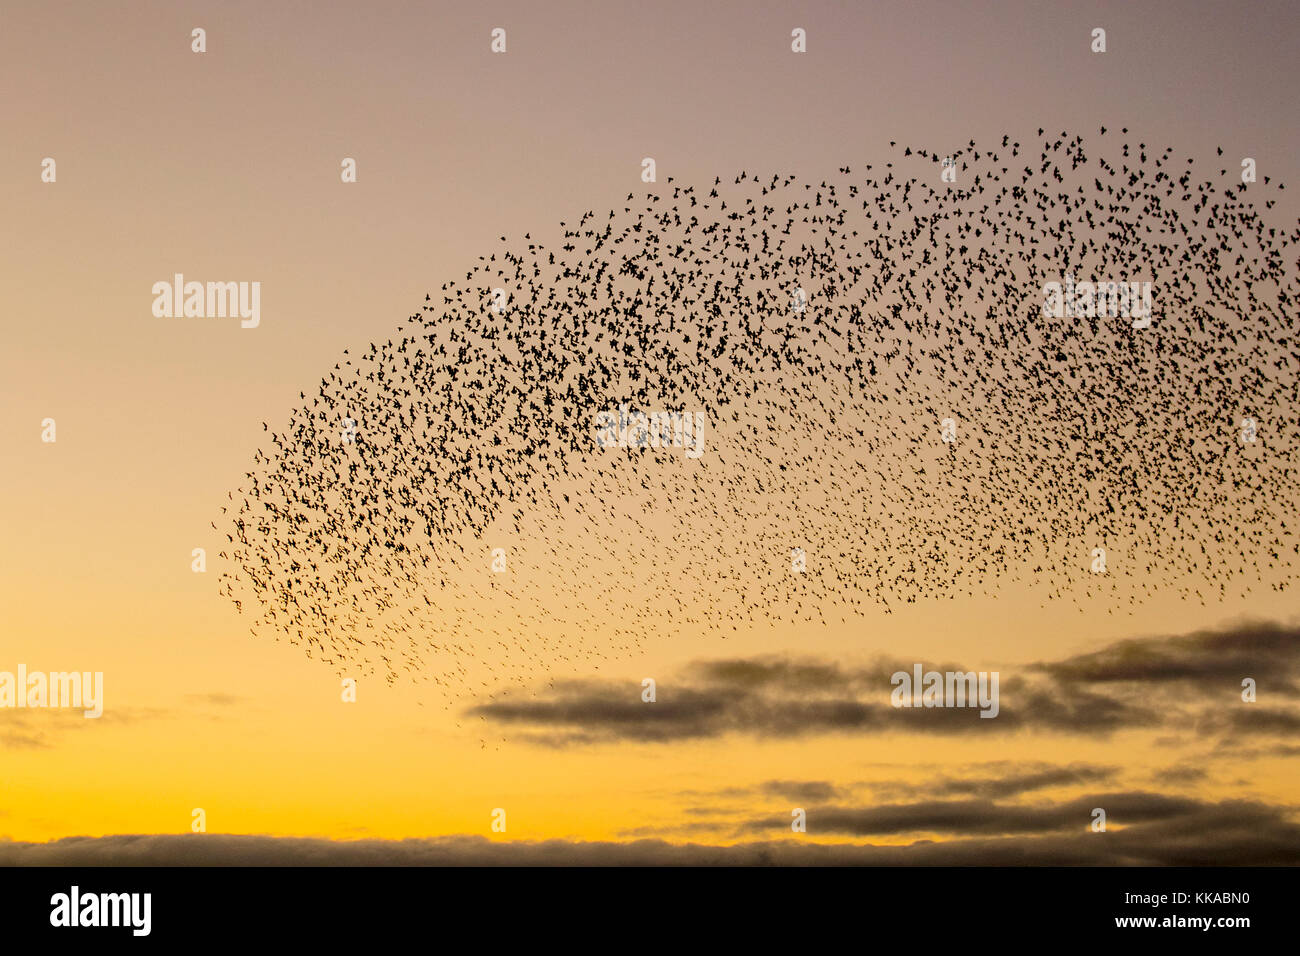 Burscough, Lancashire.  UK Weather. 29th November, 2017.Tens of thousands of starling seeking a communal roost in the reed beds at Martin Mere, are harried and pursed by a resident peregrine falcon.  The shapes and swirls form part of an evasive technique to survive and to confound and dazzle the bird of prey. The larger the simulated flocks, the harder it is for the predators to single out and catch an individual bird. Starlings can fly swiftly in coordinated and mesmerising formations as a group action to survive the attack. Credit;MediaWorldImages/AlamyLiveNews. Stock Photo